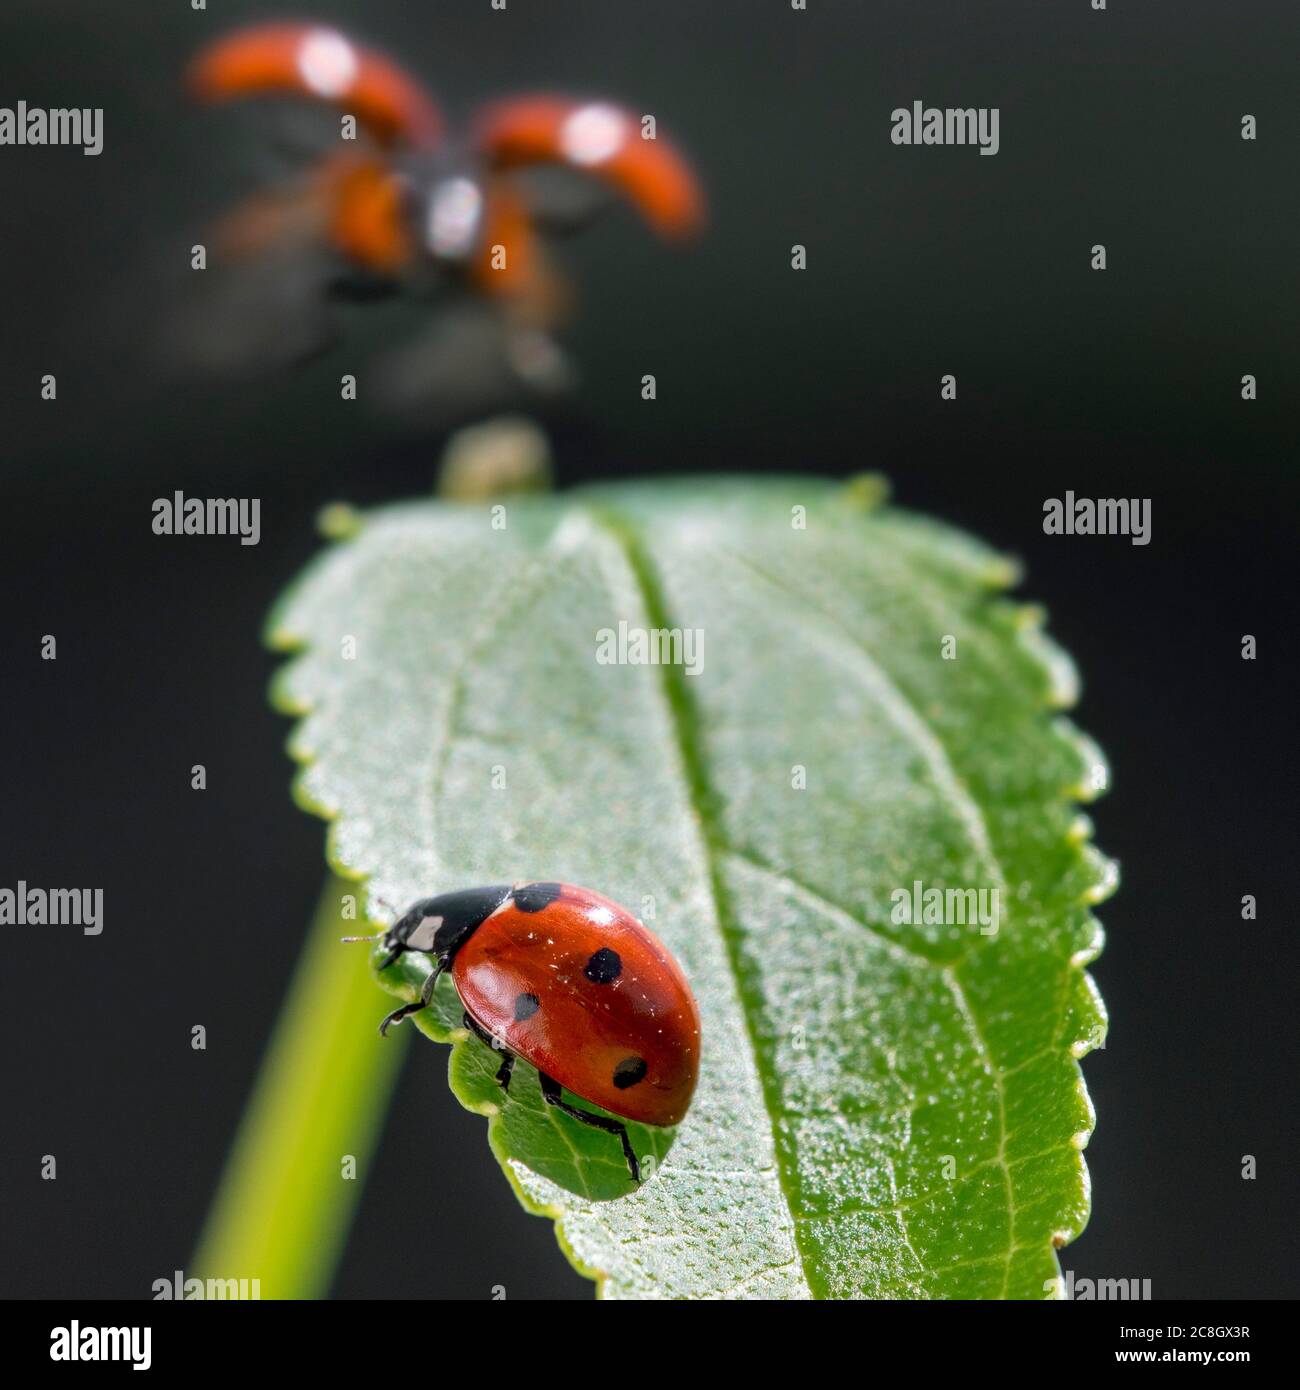 Seven-spot ladybird / seven-spotted ladybug / C-7 (Coccinella septempunctata) on leaf and another seven-spotted ladybird taking off Stock Photo